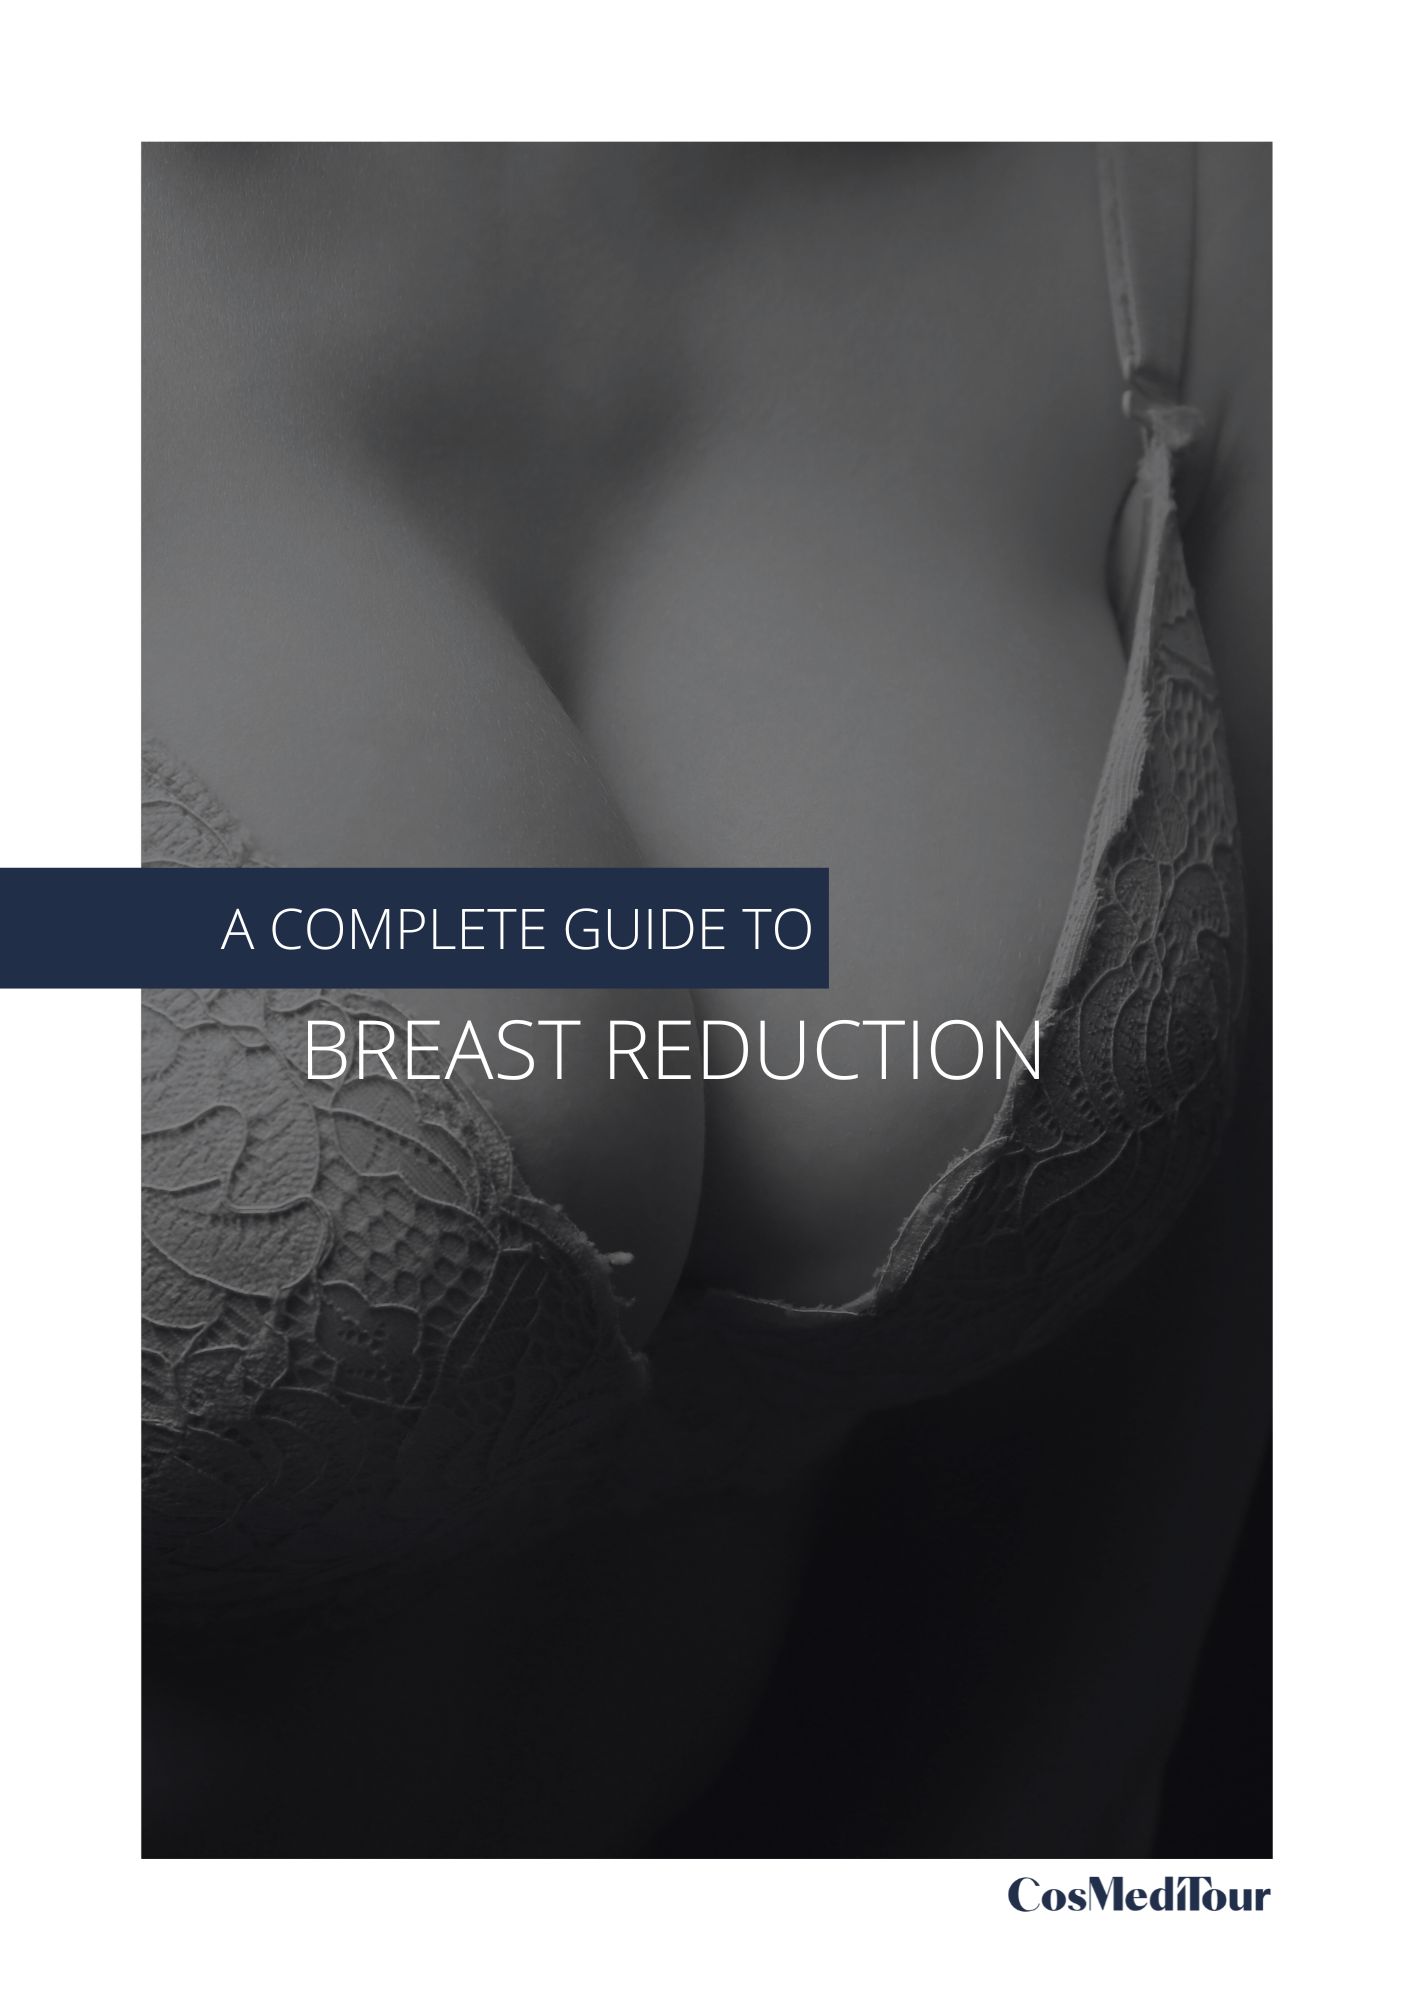 Your Guide to Breast Reduction